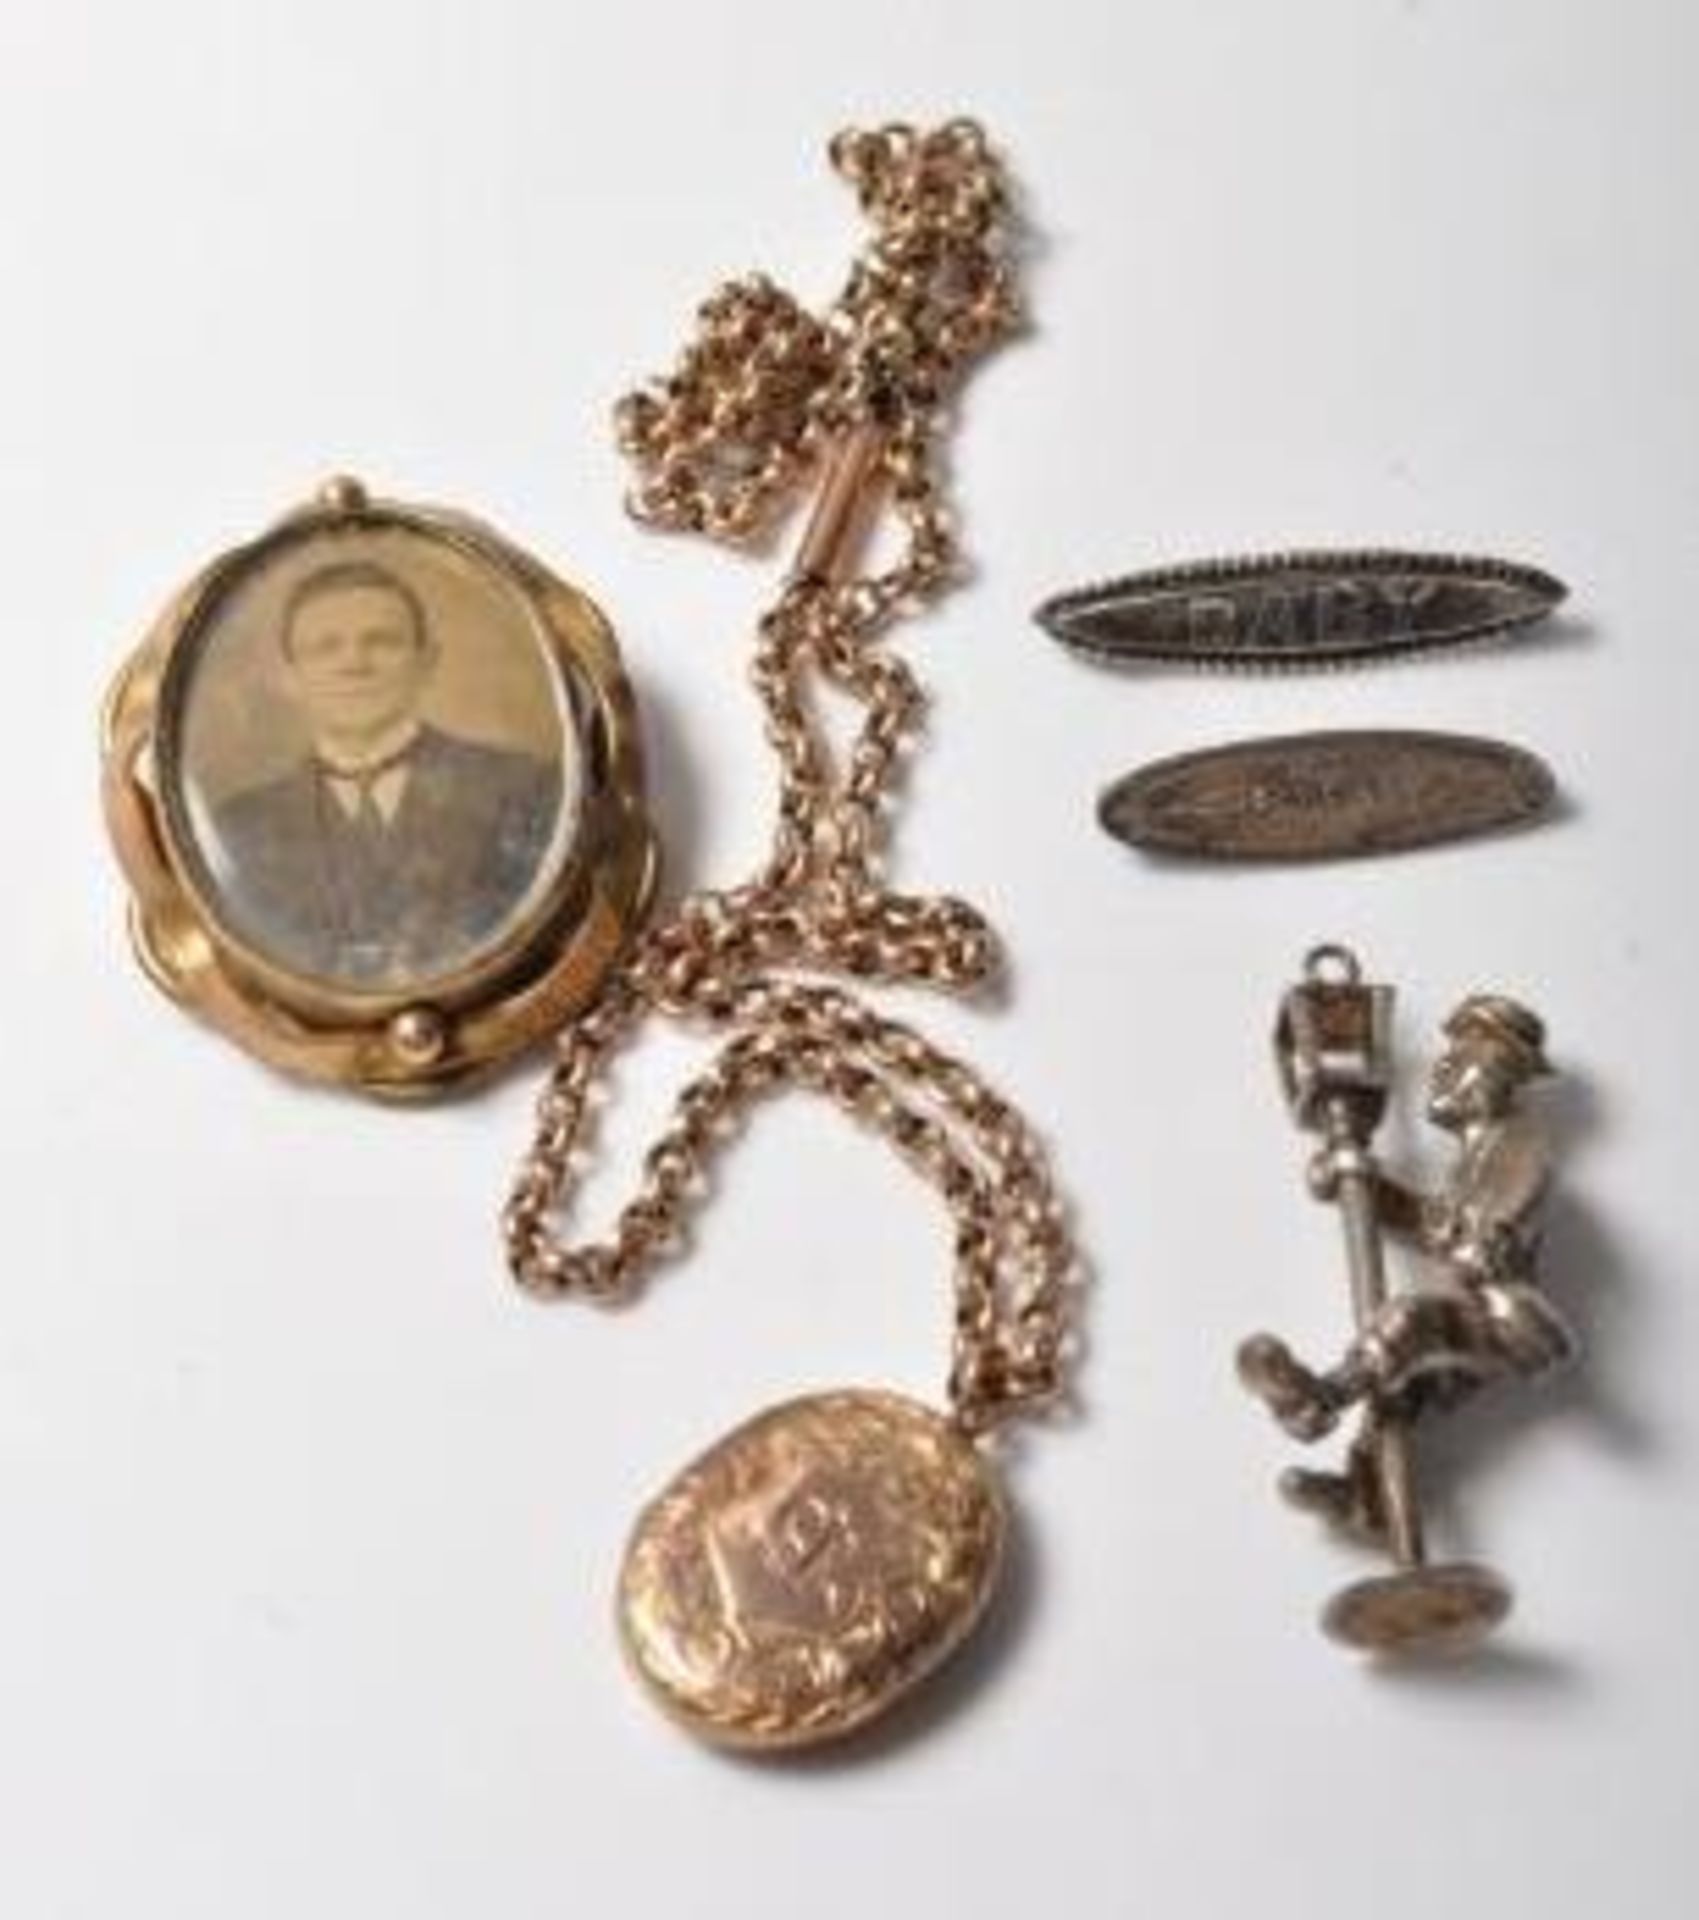 GROUP OF ANTIQUE EDWARDIAN AND LATER JEWELLERY